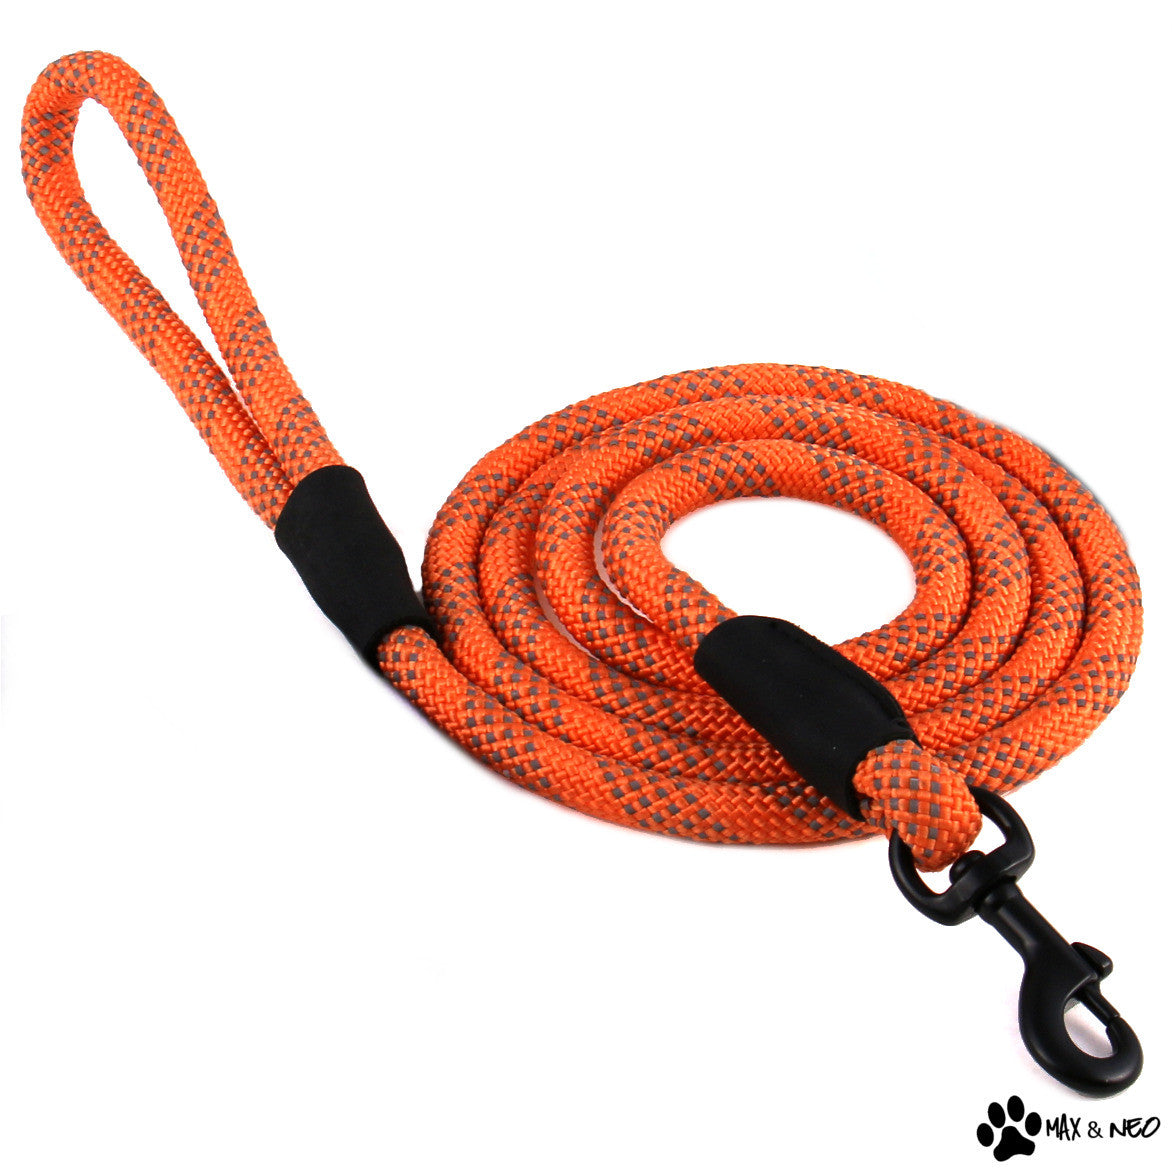 REFLECTIVE ROPE LEAD - Next Cash and Carry